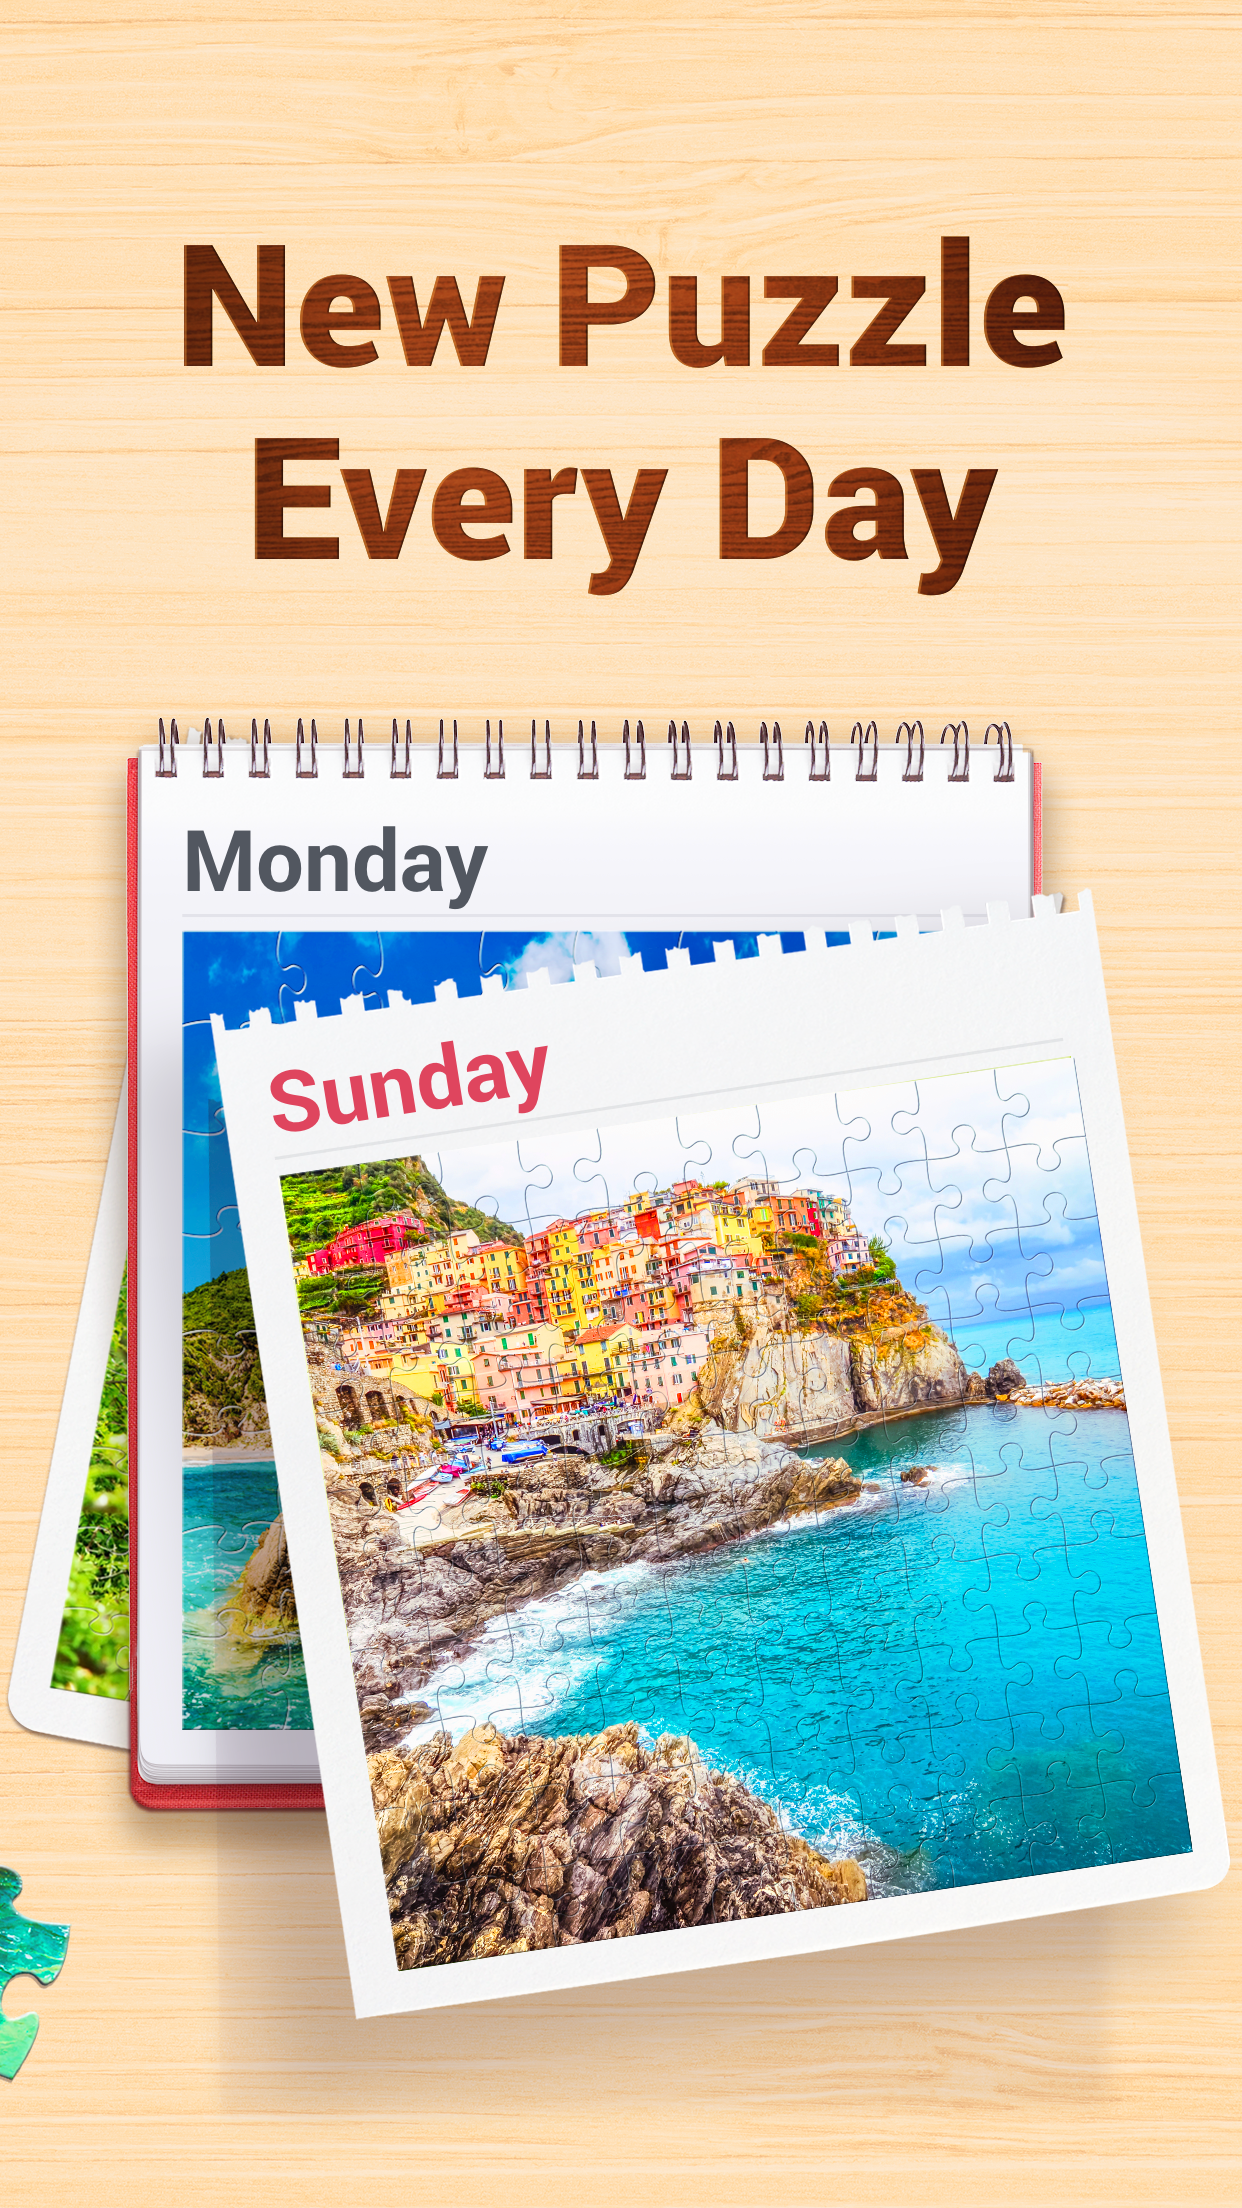 everyday jigsaw puzzles free download